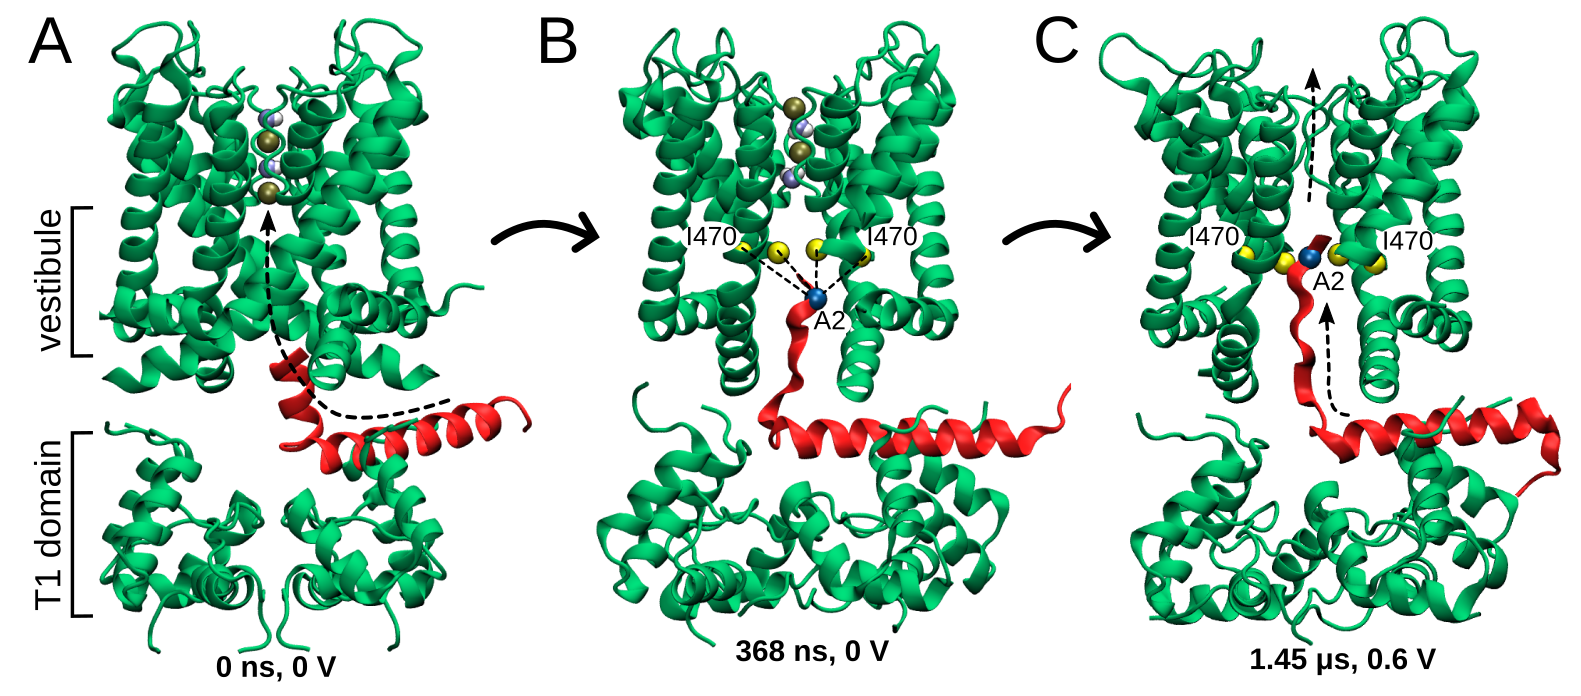 Insertion of the N-terminal gating domain into the pore of the potassium channel